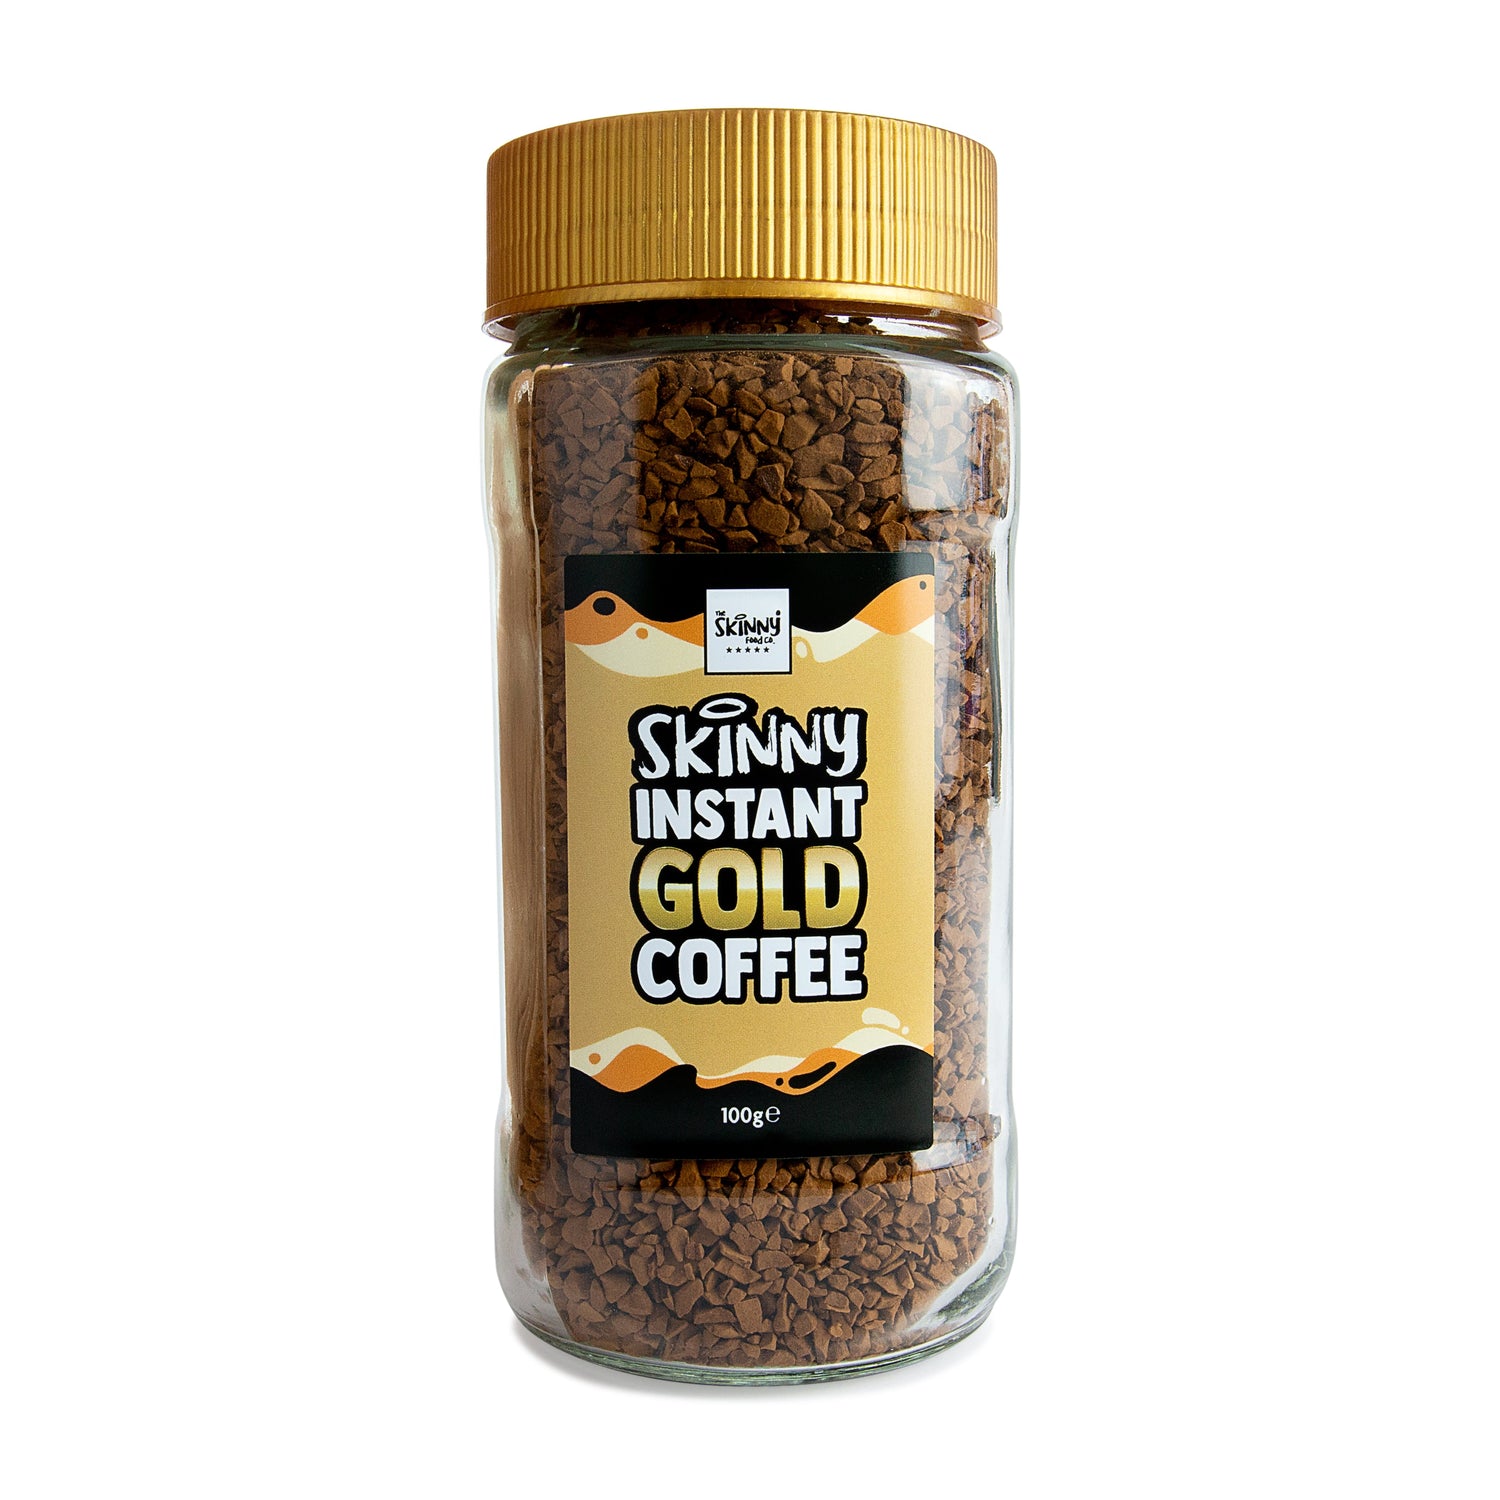 Cafea Skinny Instant Gold - 100g - theskinnyfoodco